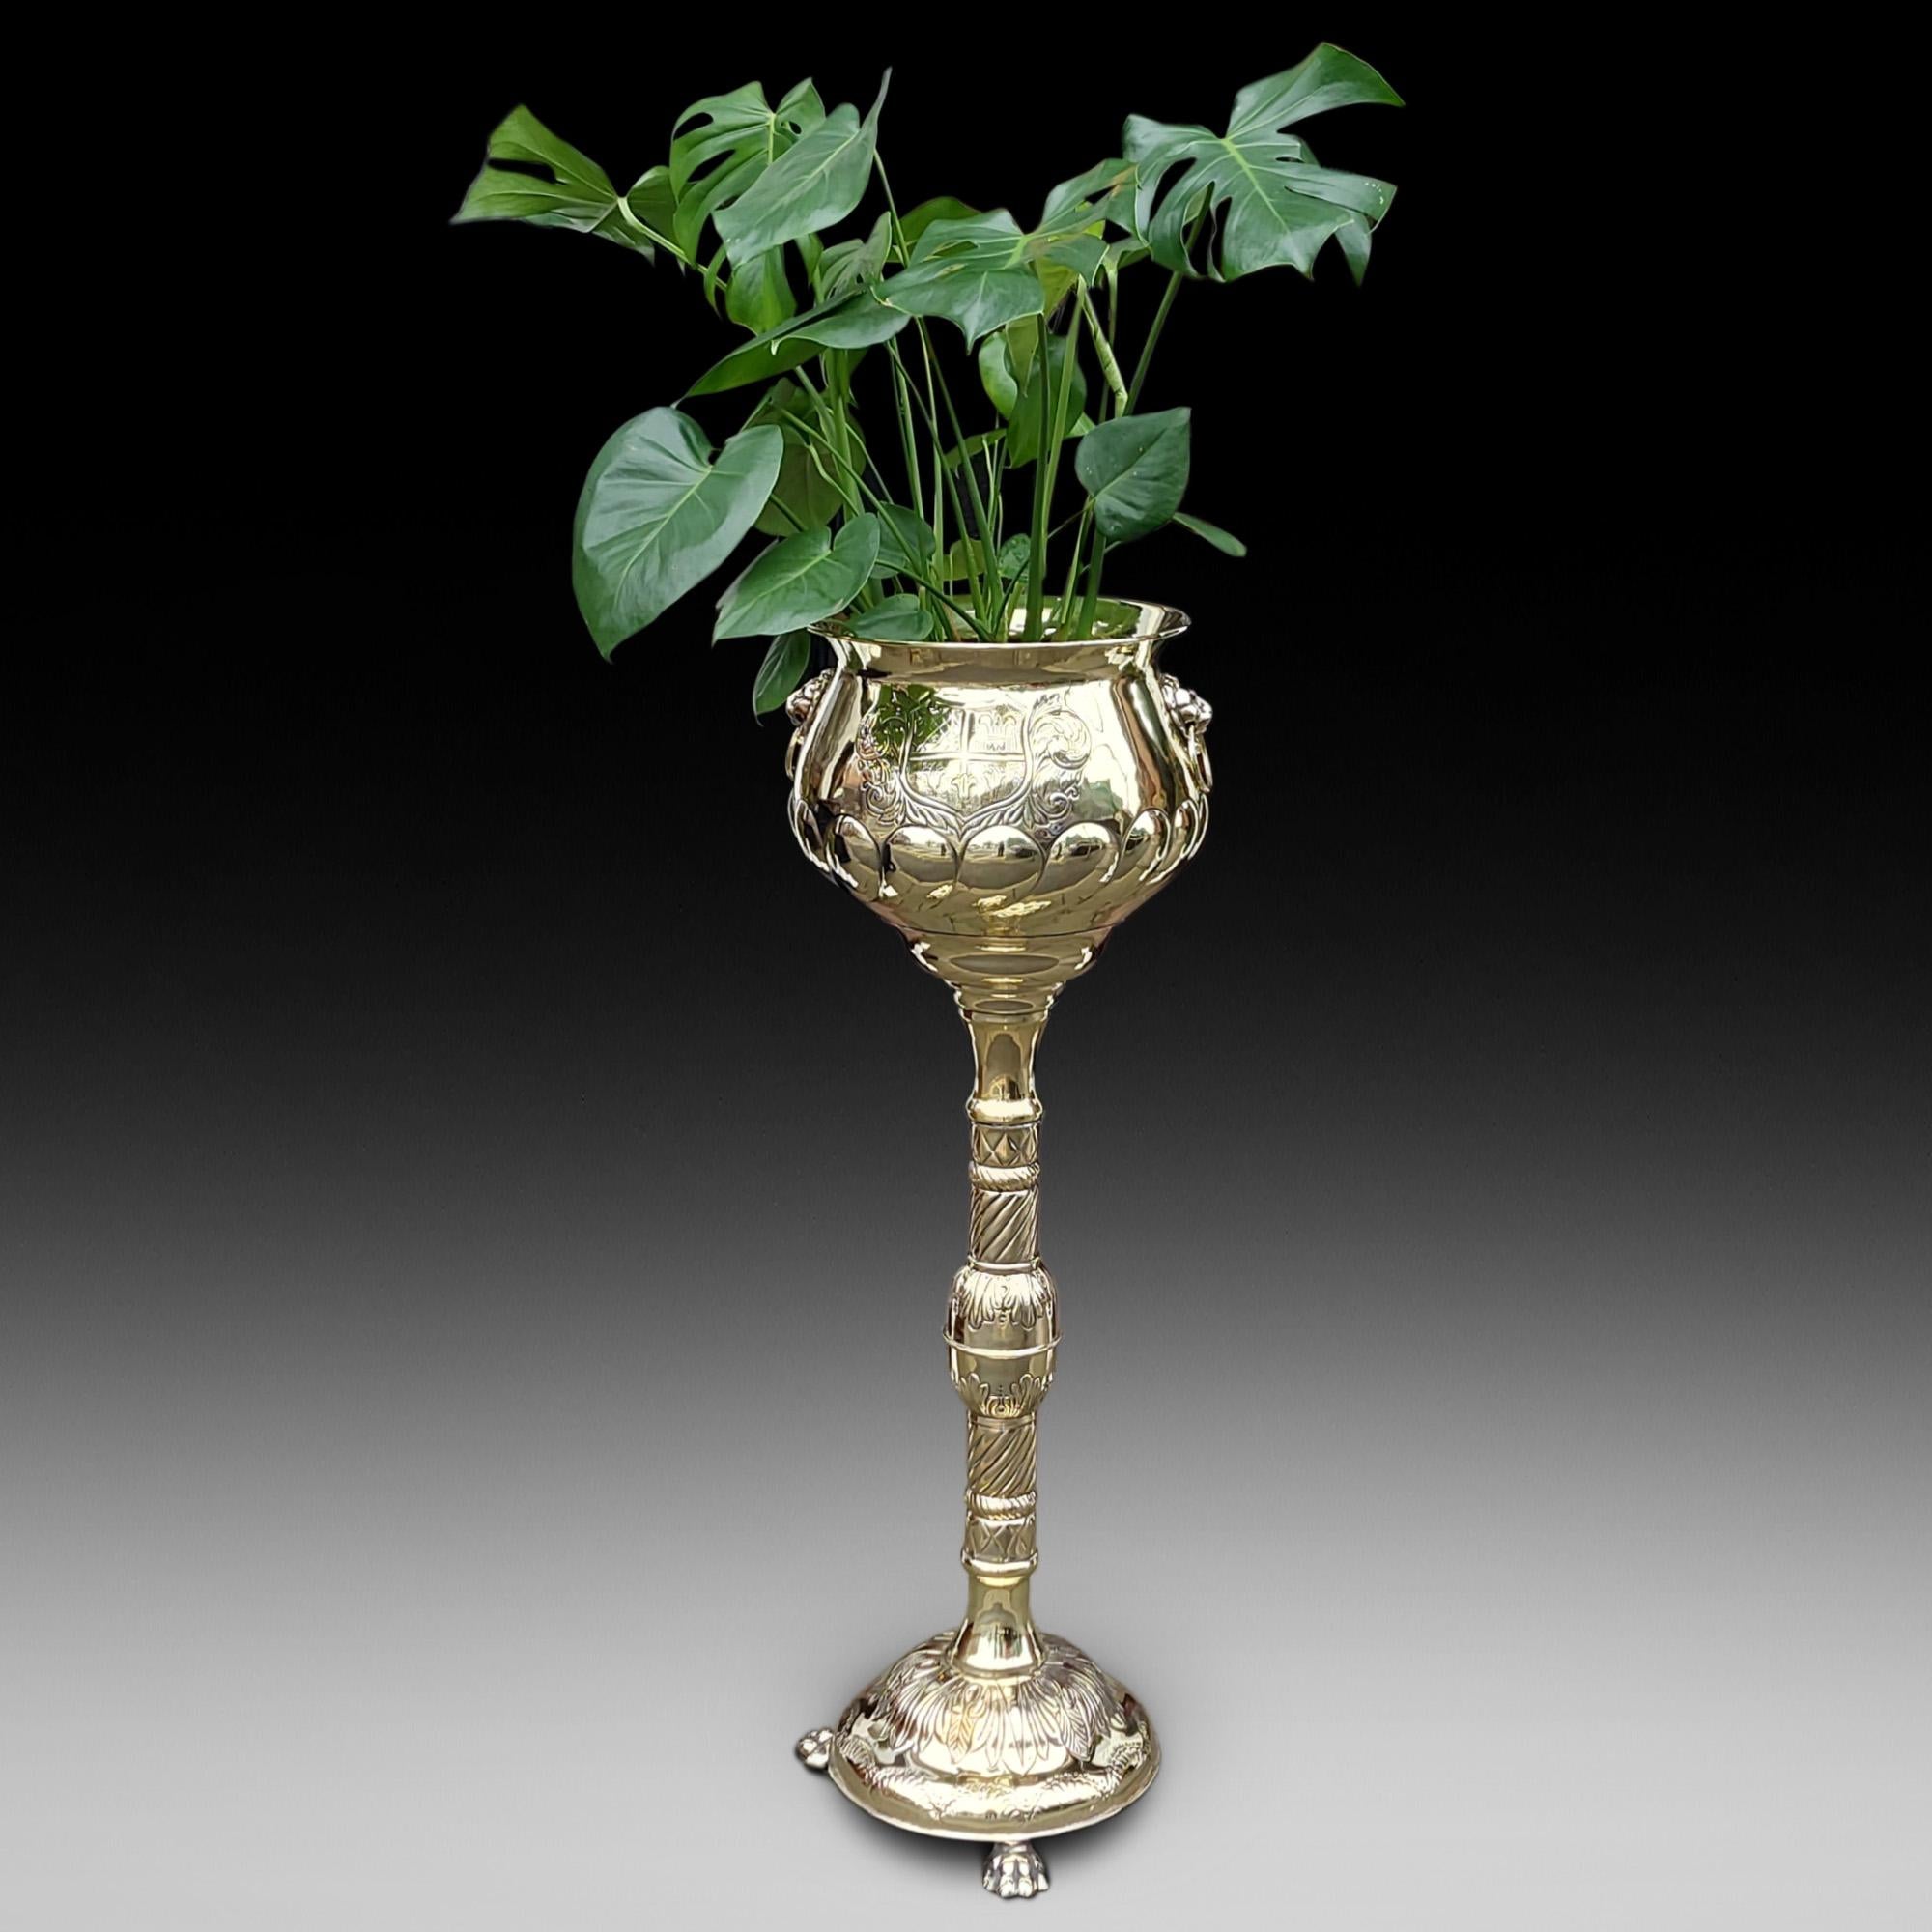 High Victorian Brass Pedestal Jardinière Planter, having relief decoration depicting an armorial crest and lion mask handles to either side, on an ornately tooled column, the plinth base with lion’s paw feet - 13.5